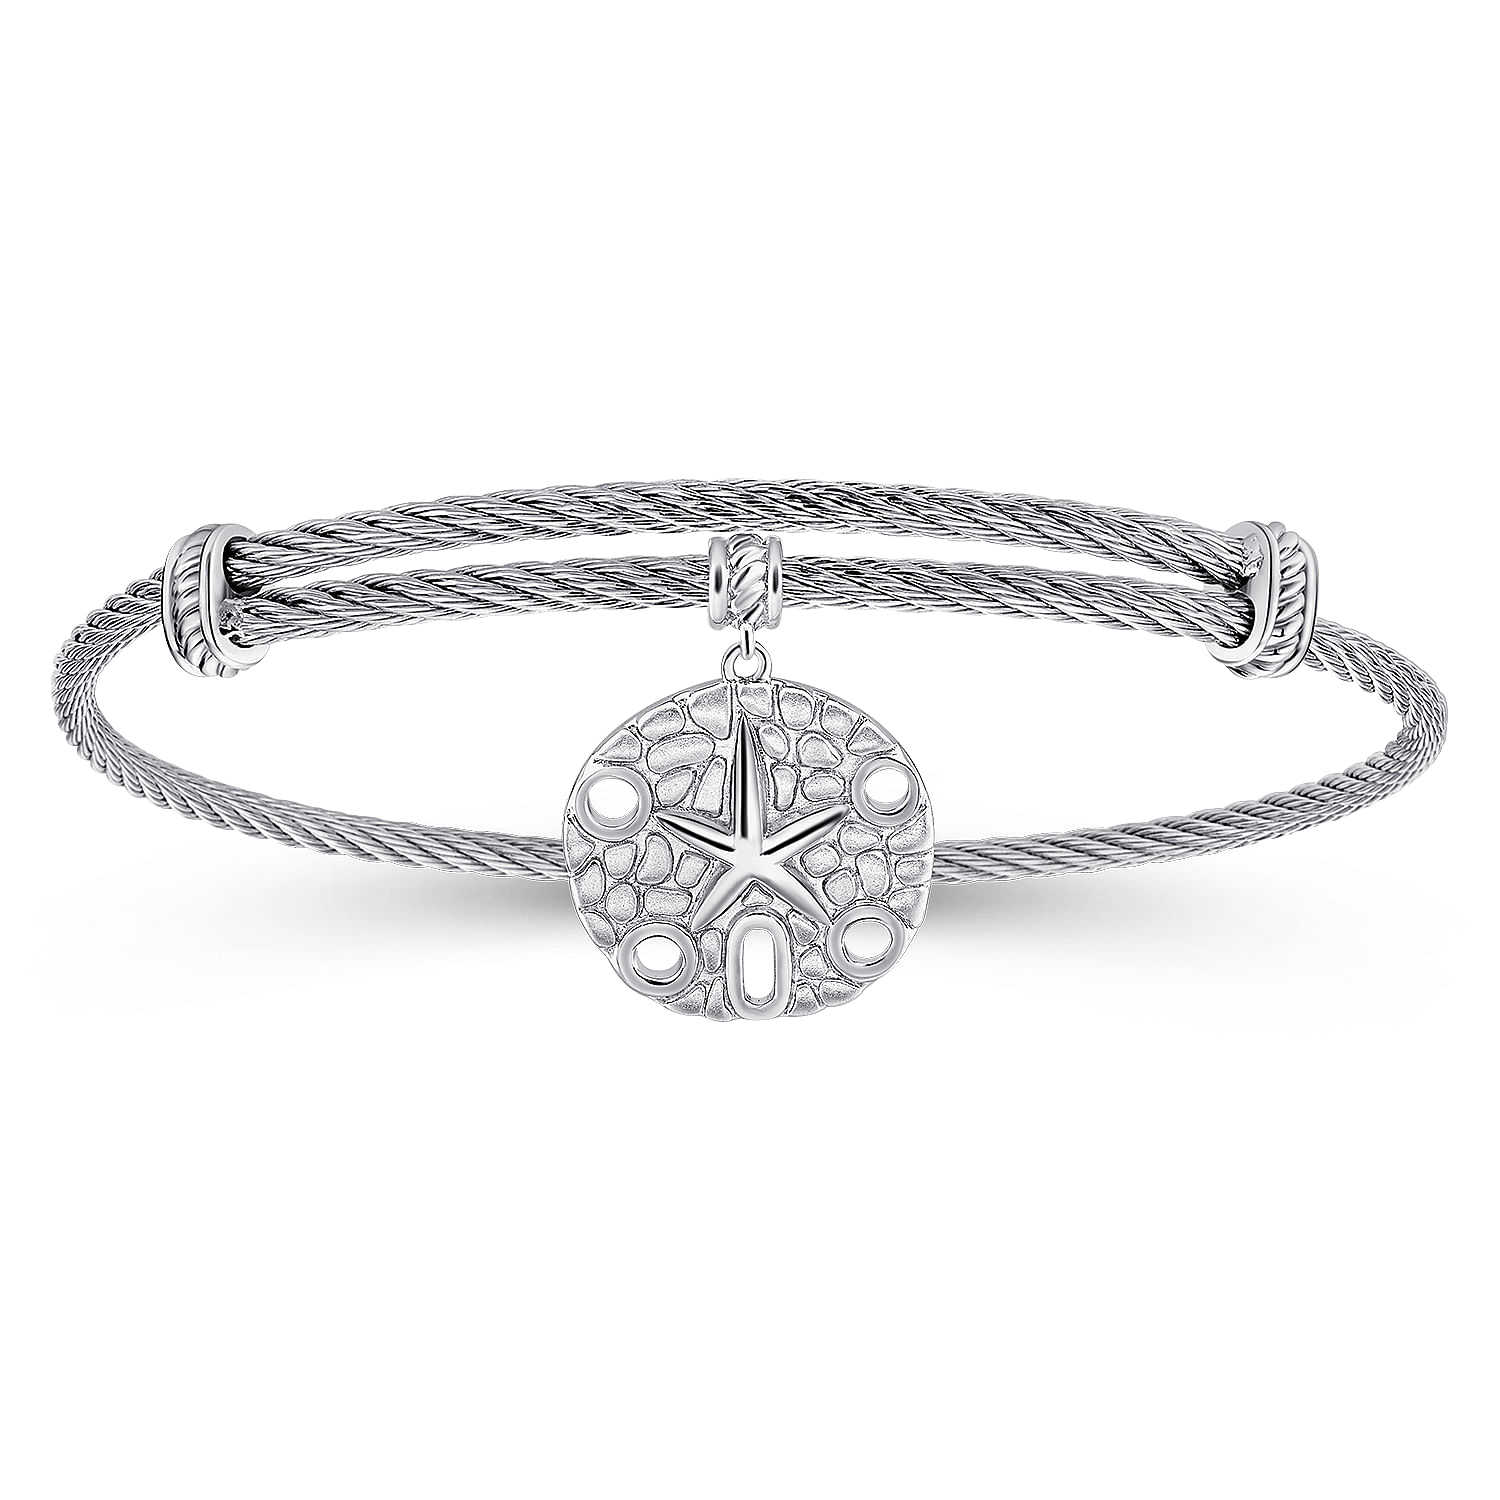 Adjustable Twisted Cable Stainless Steel Bangle with Sterling Silver Sand Dollar Charm